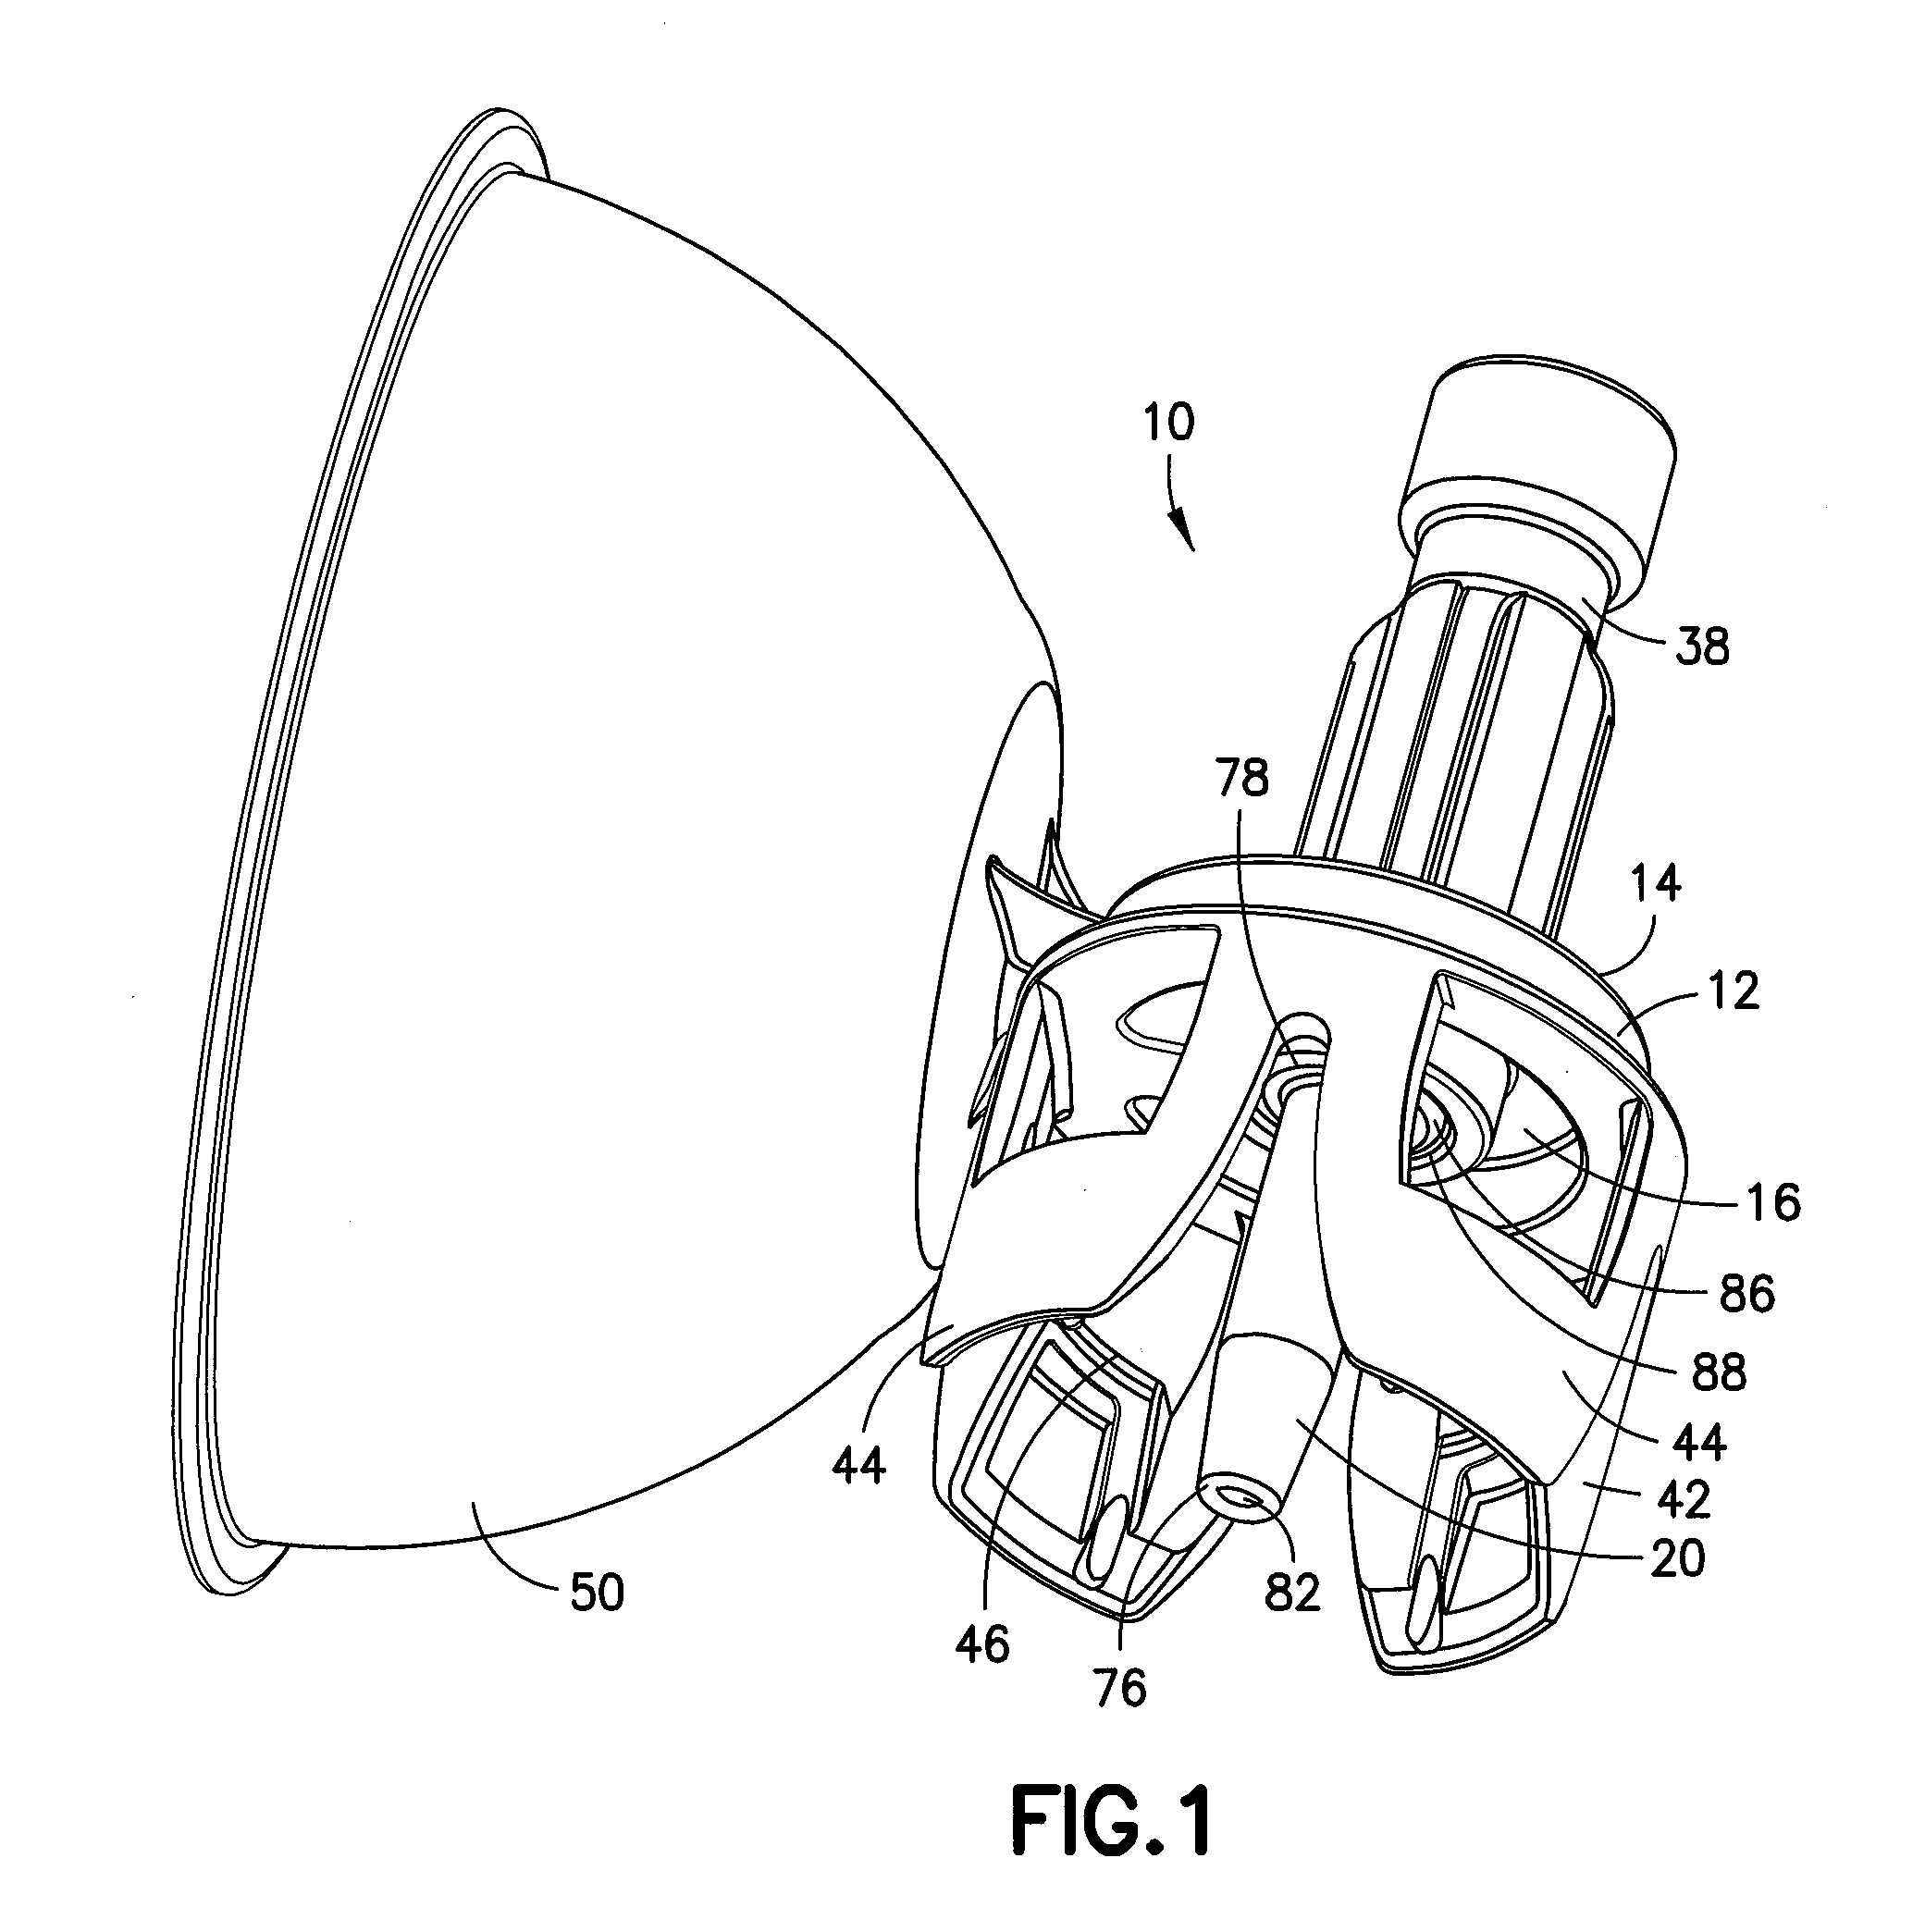 Piercing Member for Container Access Device